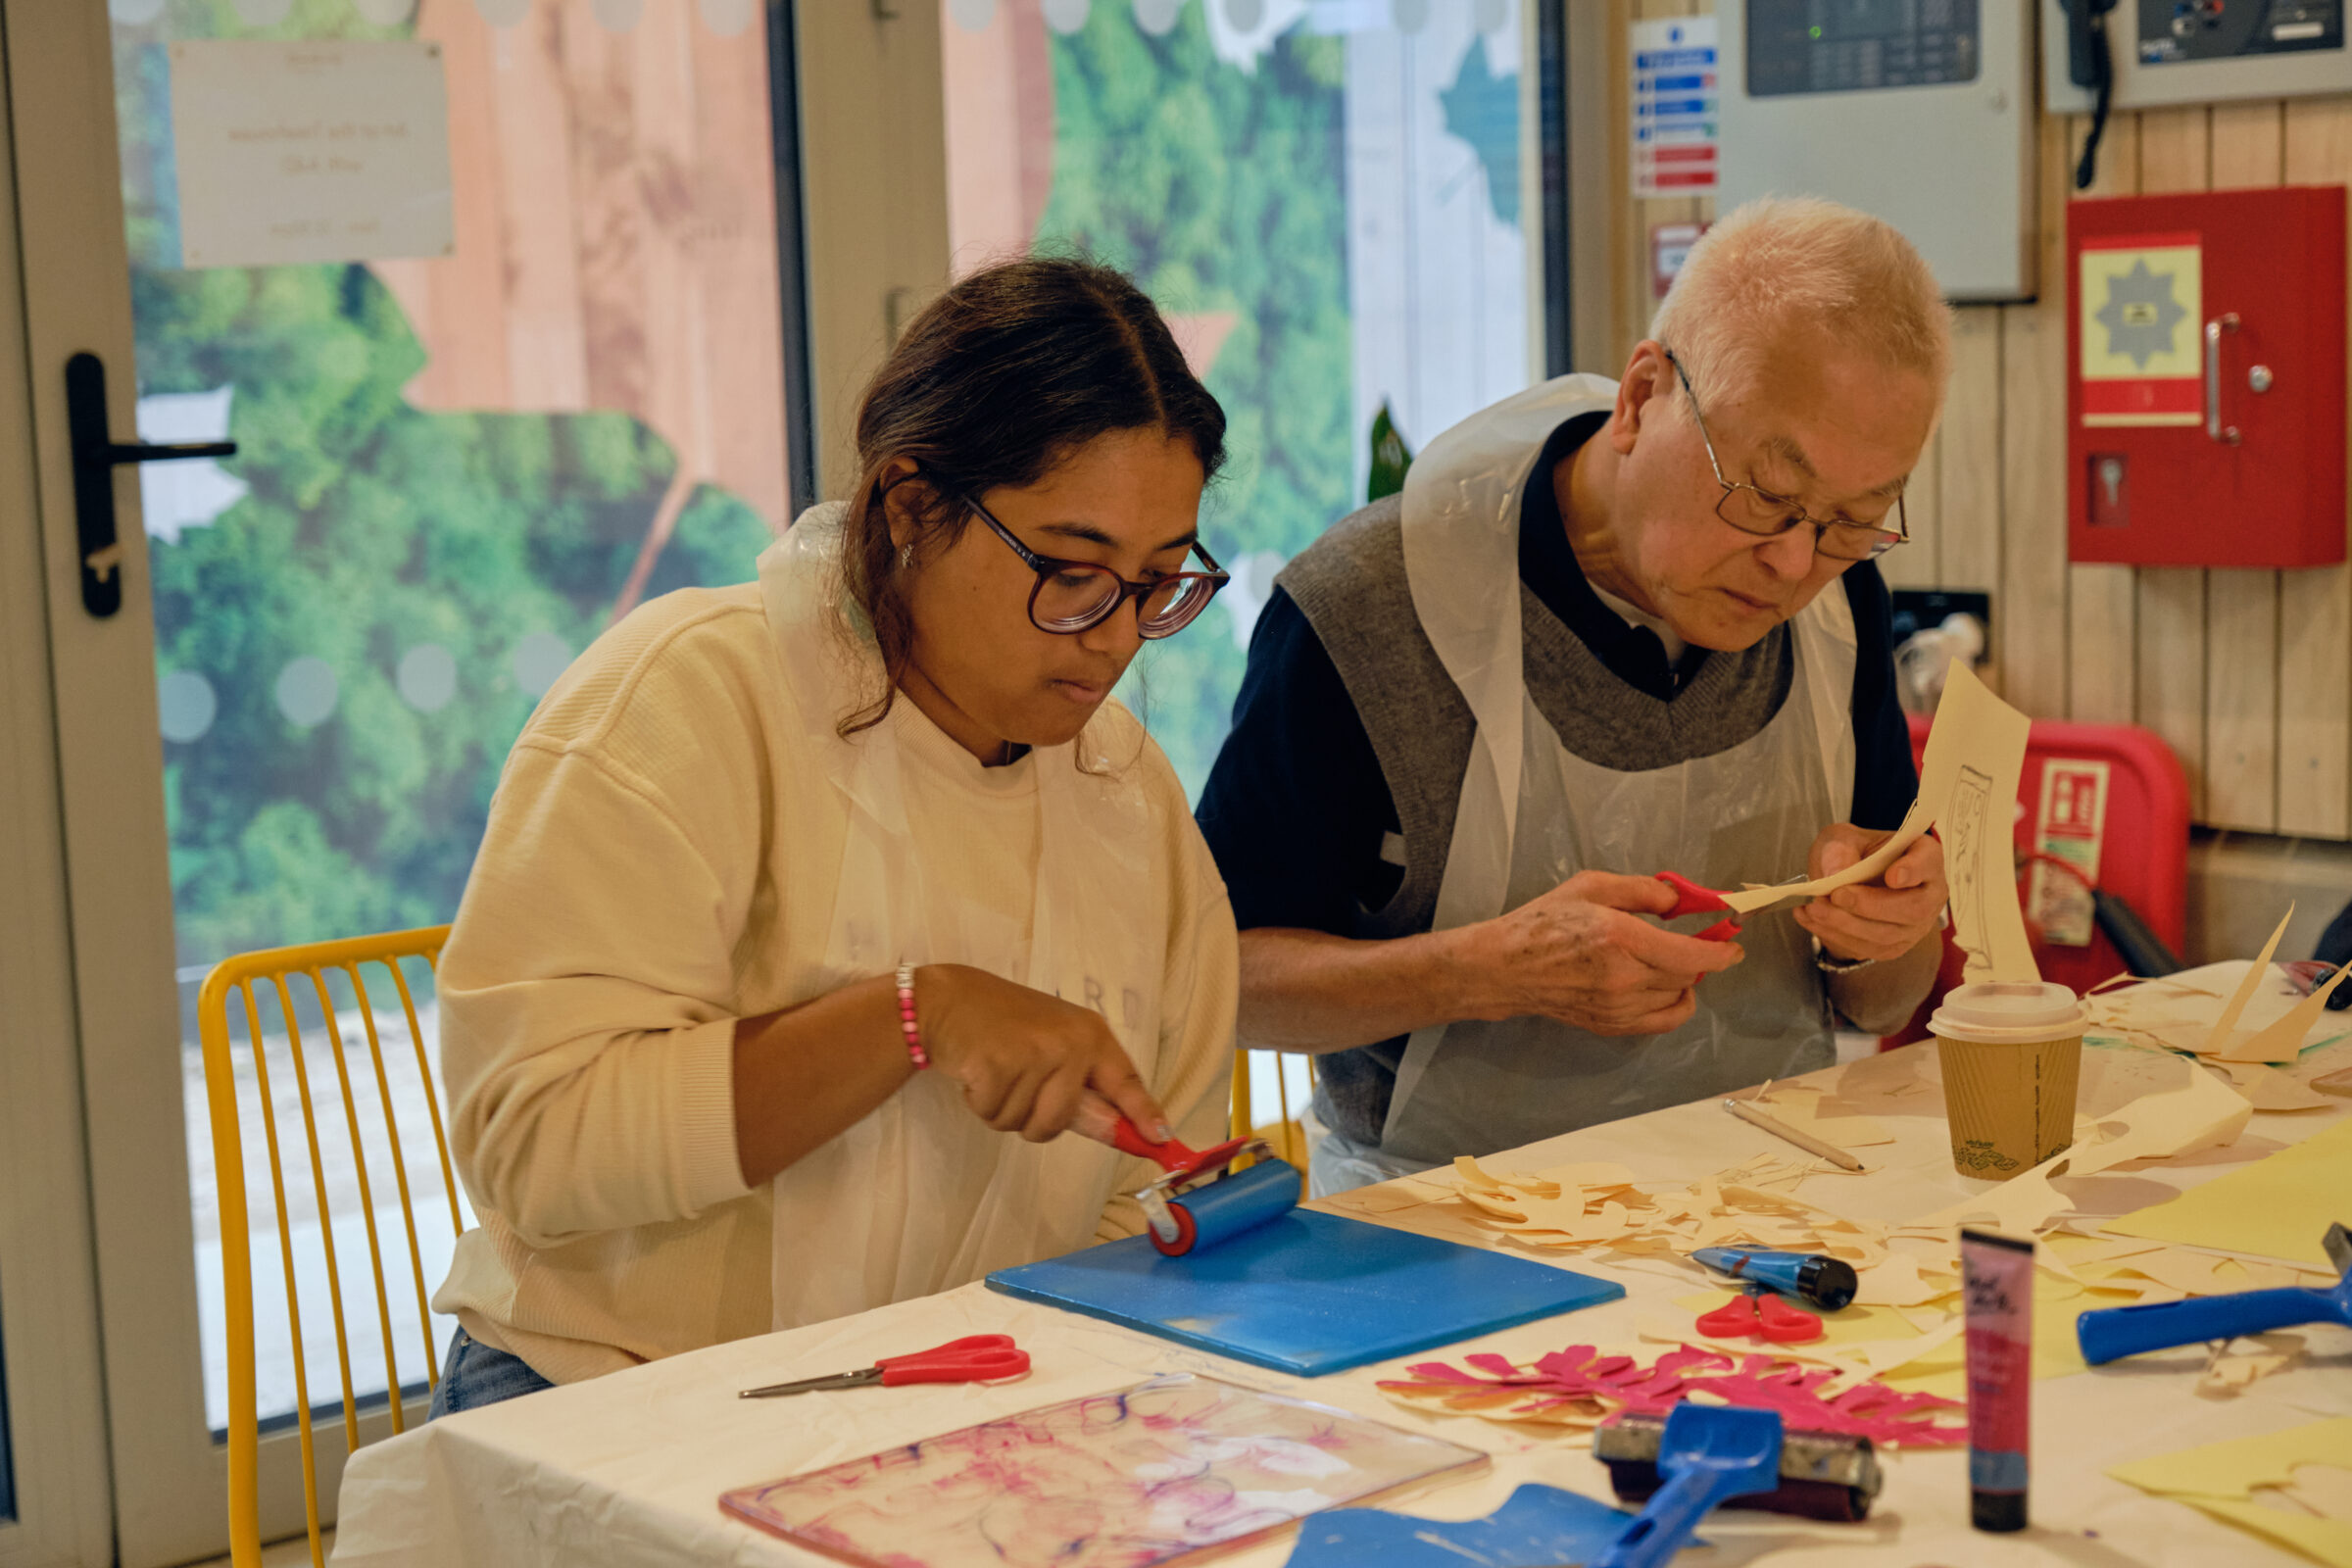 Two people are concentrating on creating. A younger woman is rolling blue ink onto a picture, and an older man is cutting out fine details into paper.